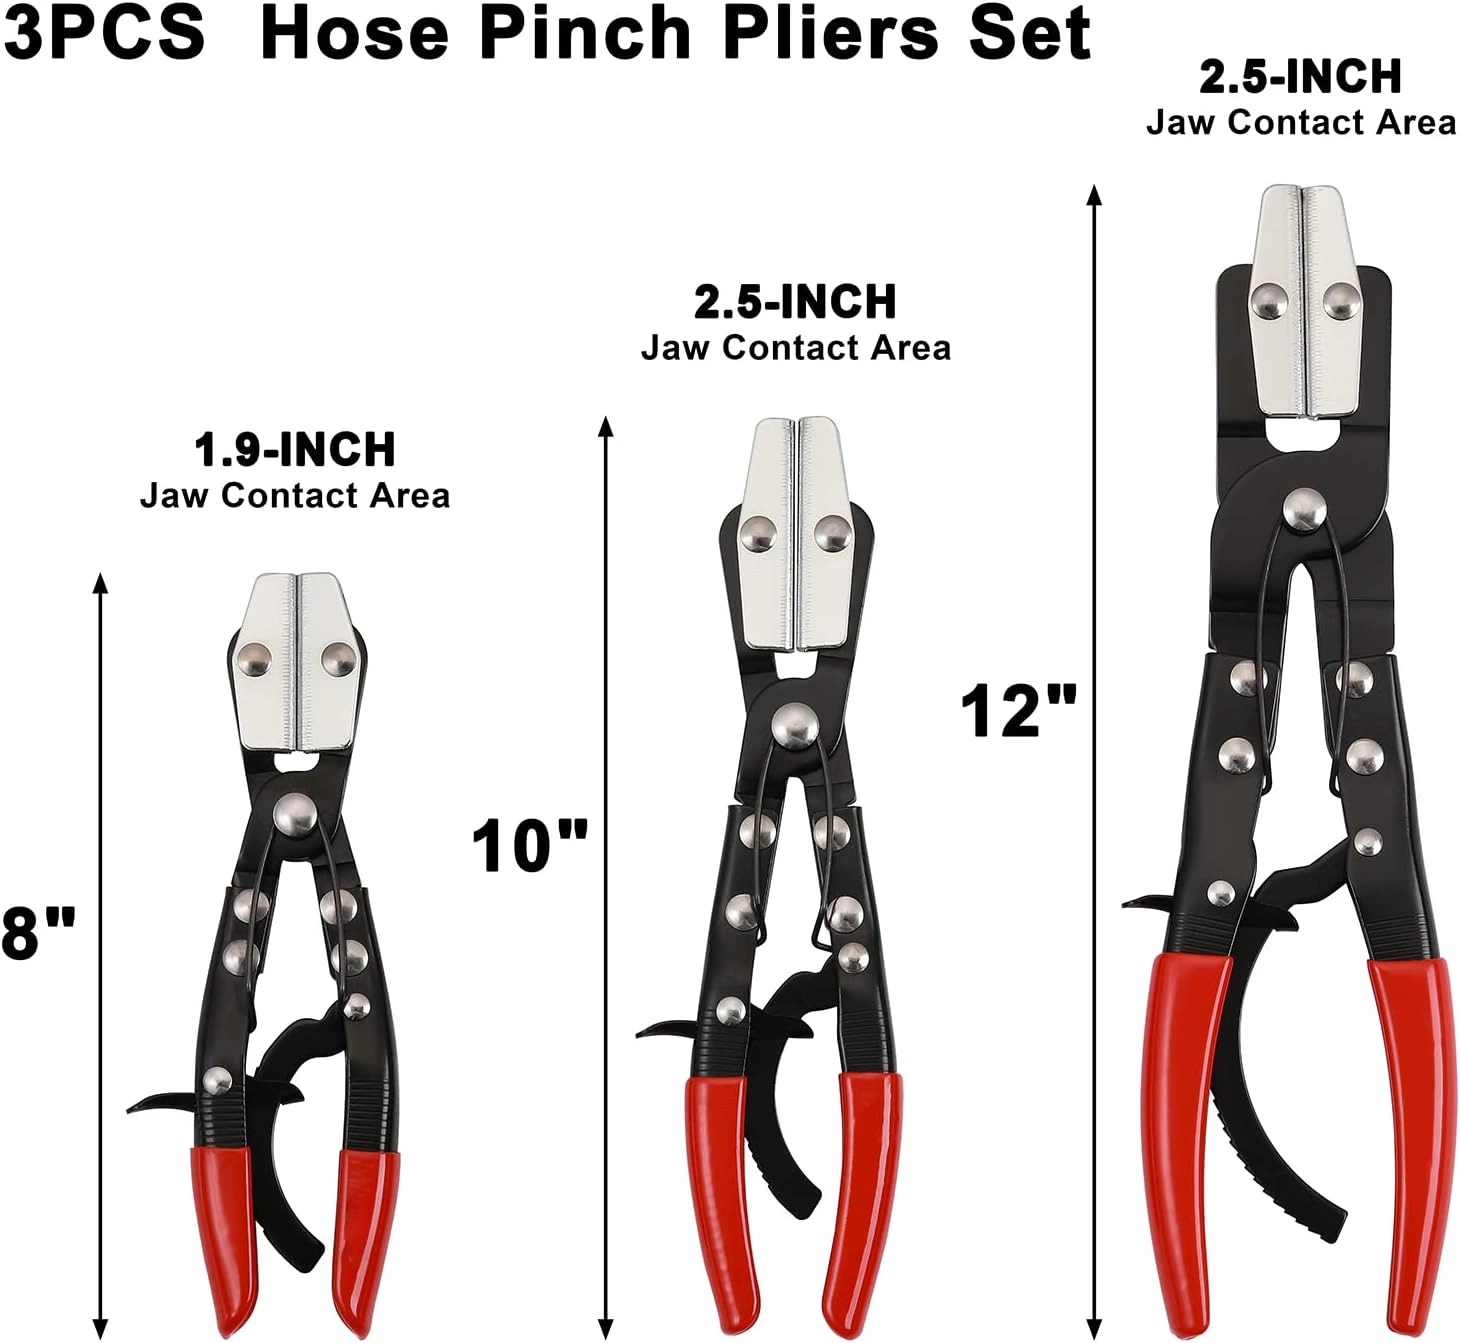 Hose Pinch off Pliers for Automotive Hose Lines, Radiator Lines